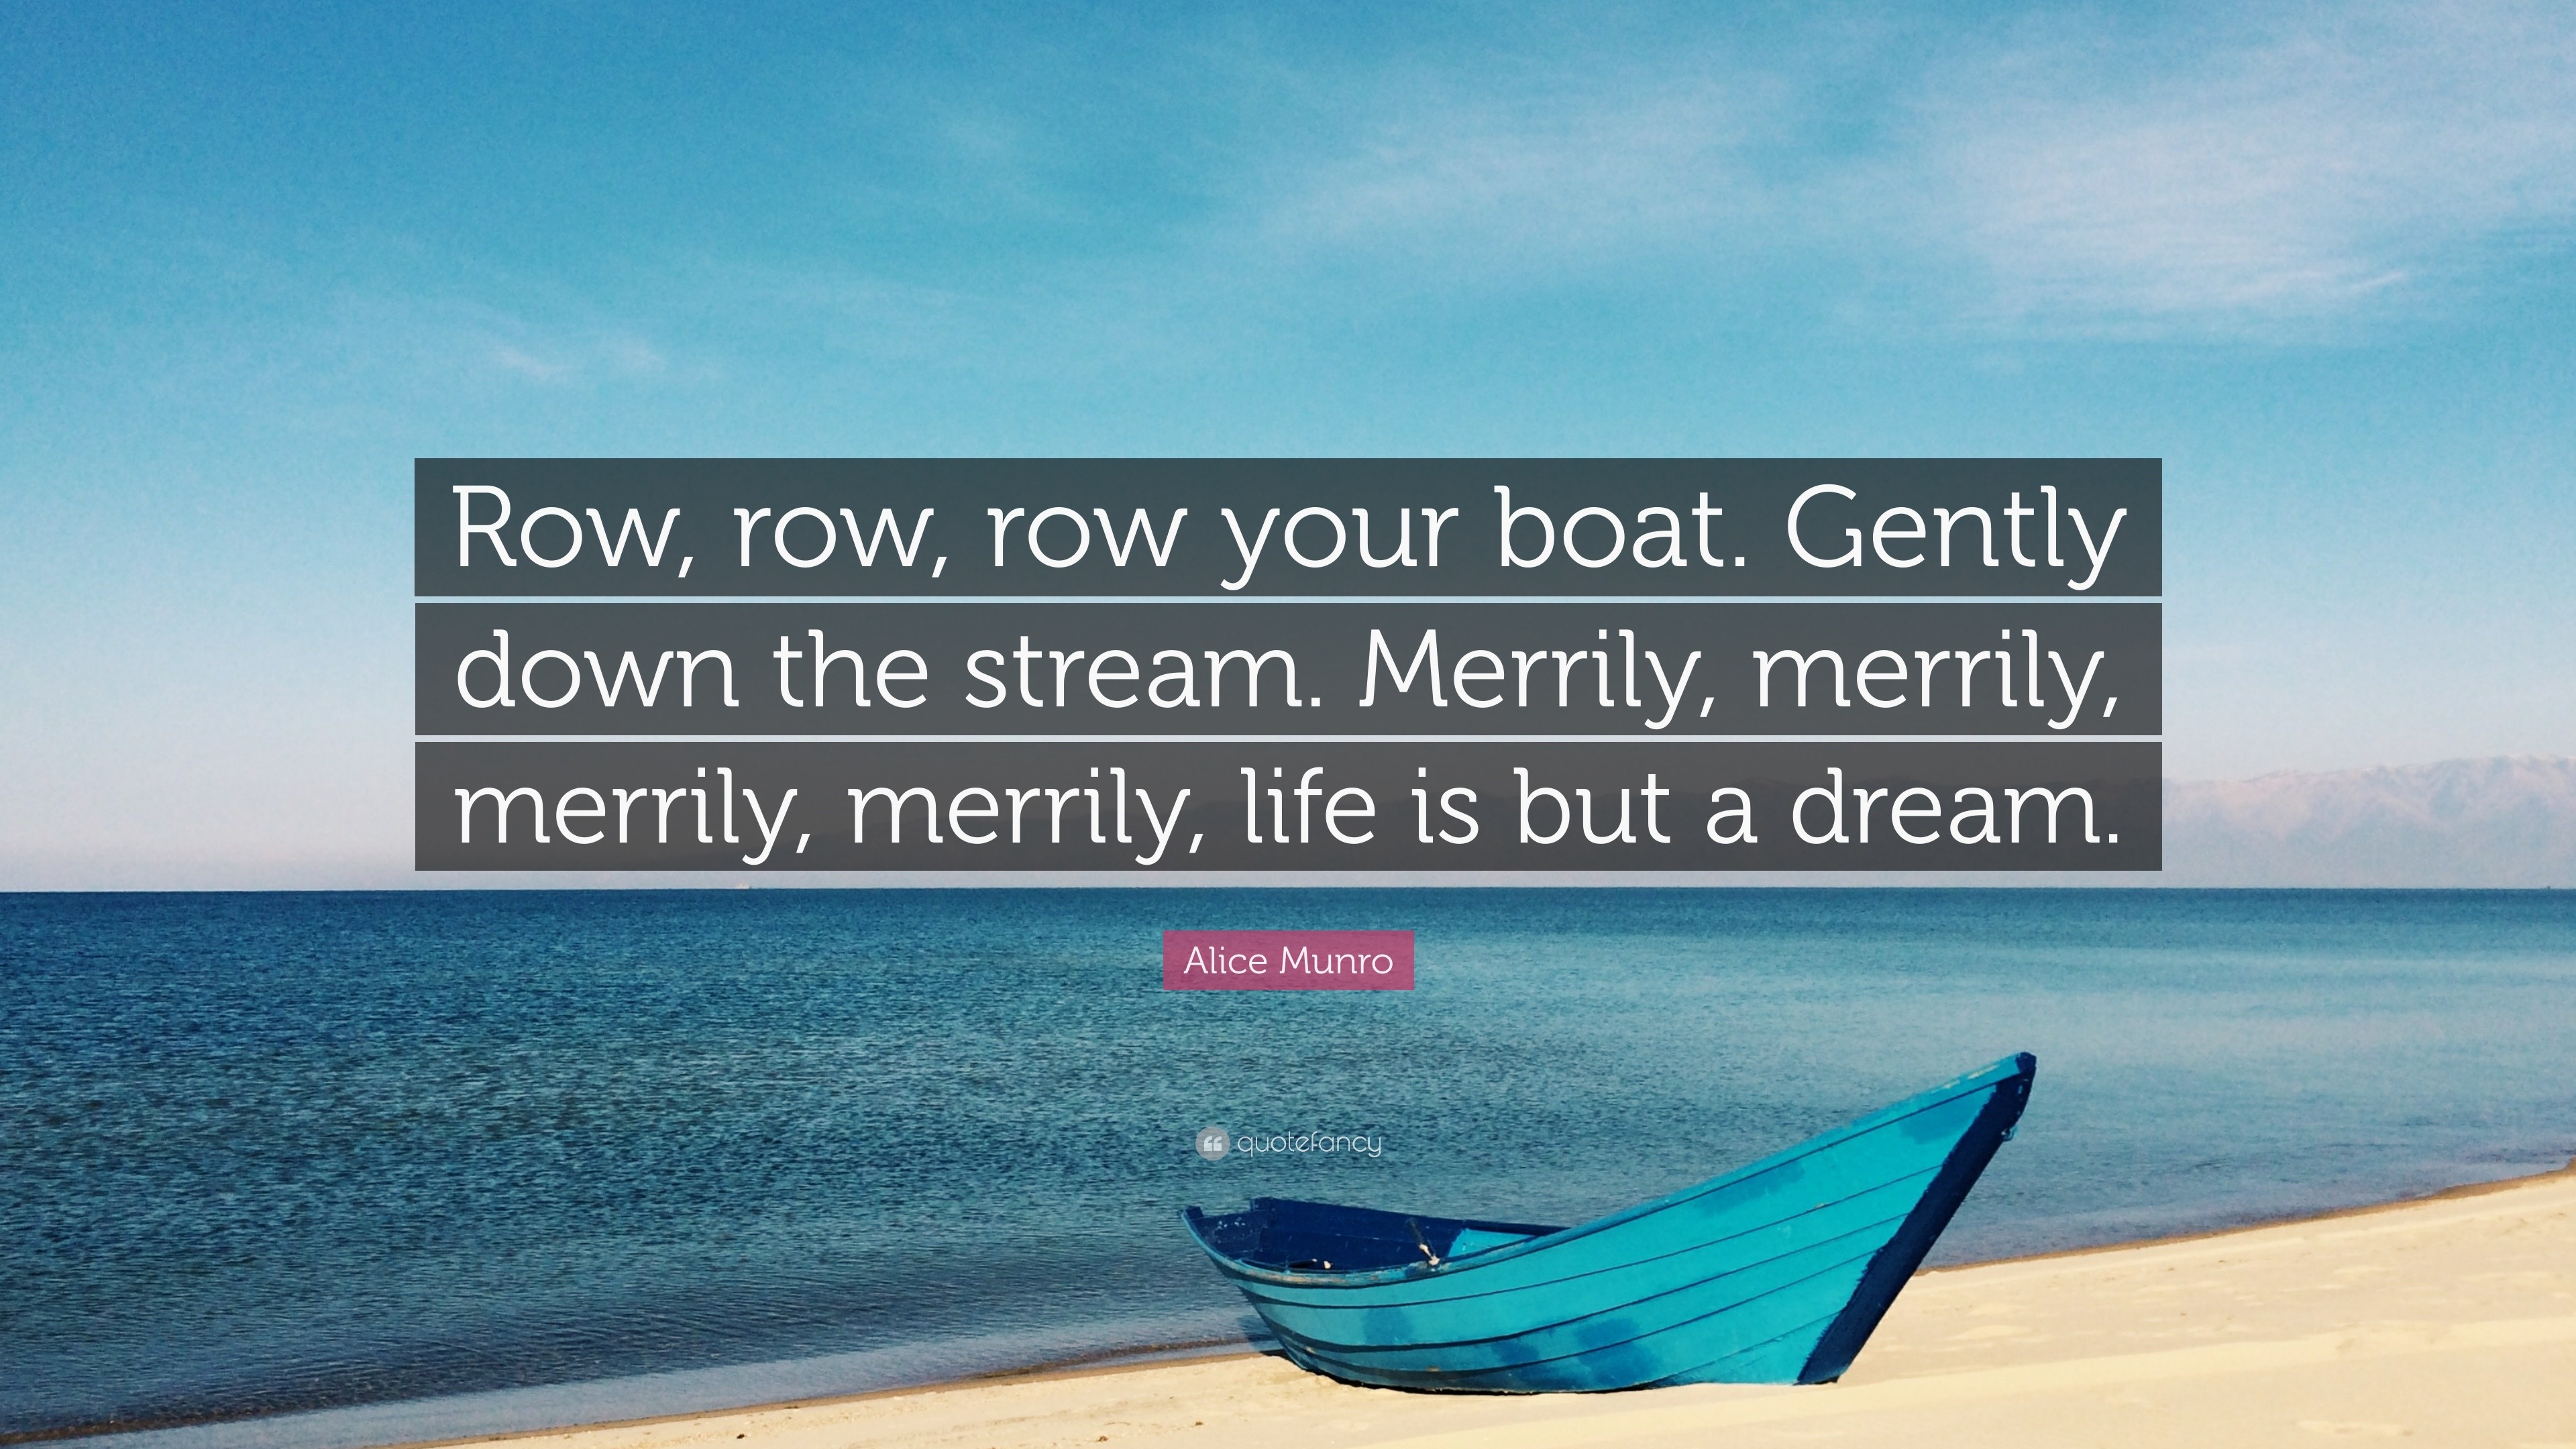 Alice Munro Quote: “Row, row, row your boat. Gently down the stream.  Merrily, merrily, merrily, merrily,